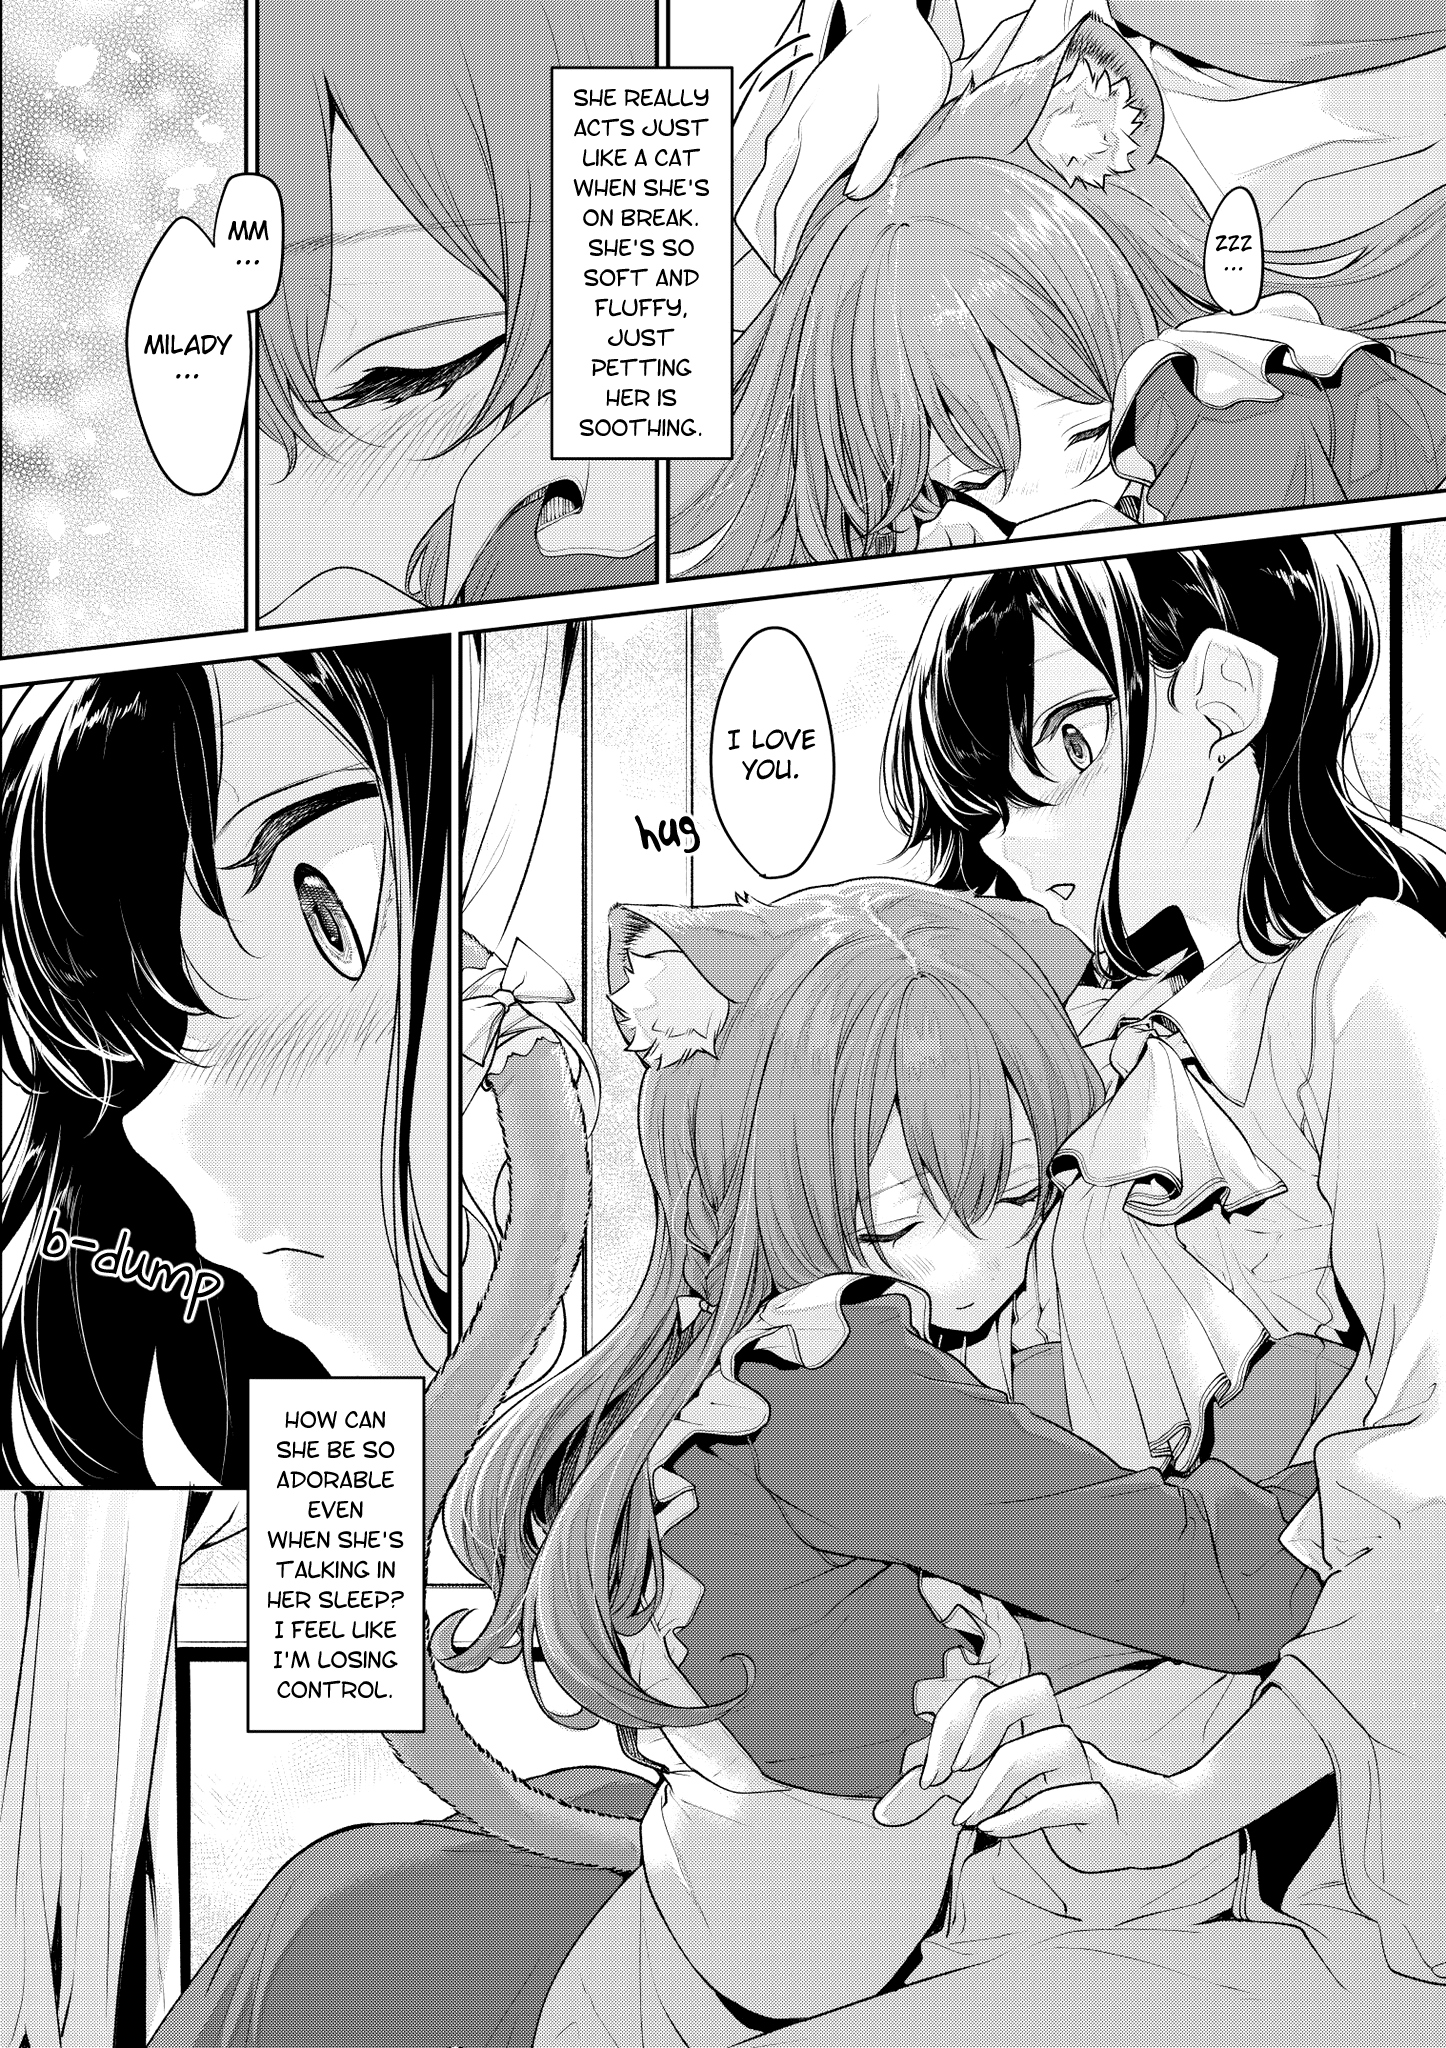 Cat Maid And Mistress - Page 2